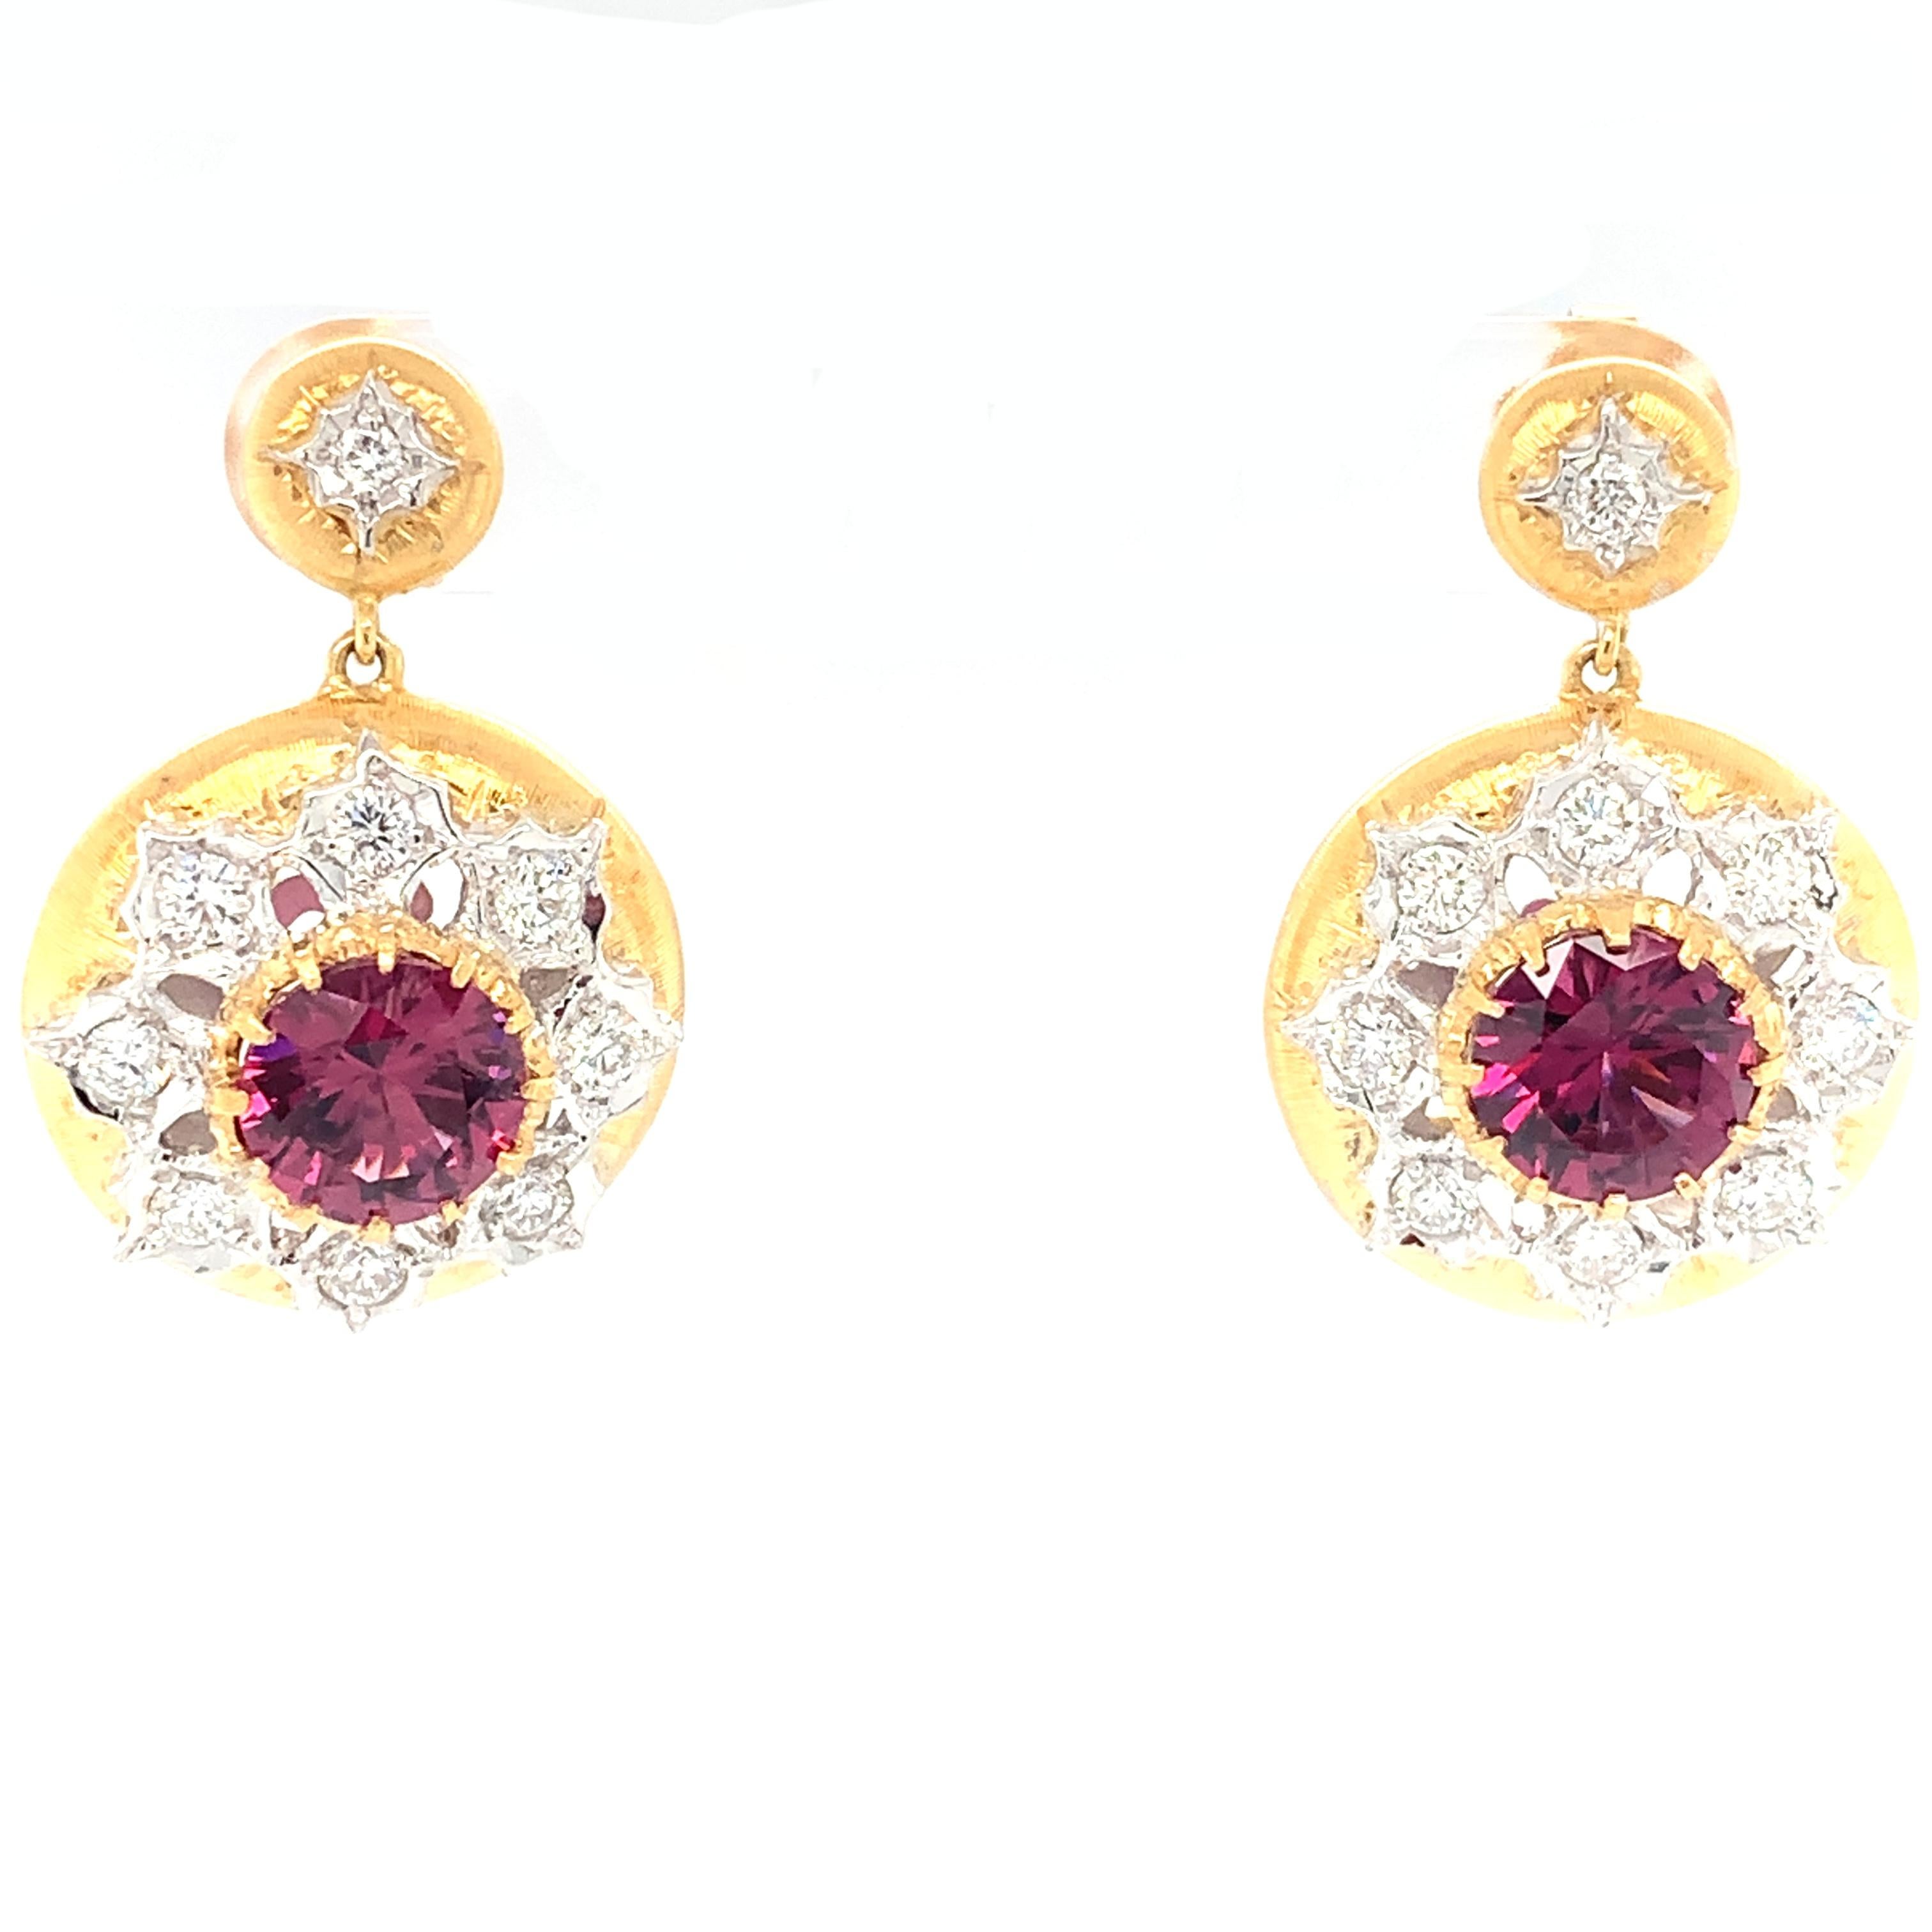 Handmade in Italy in the Florentine style, these stunning 18k yellow and white gold earrings feature world-class gemstones and craftsmanship. Garnets have long been a favorite of gem connoisseurs, and a pair perfectly matched, richly colored deep